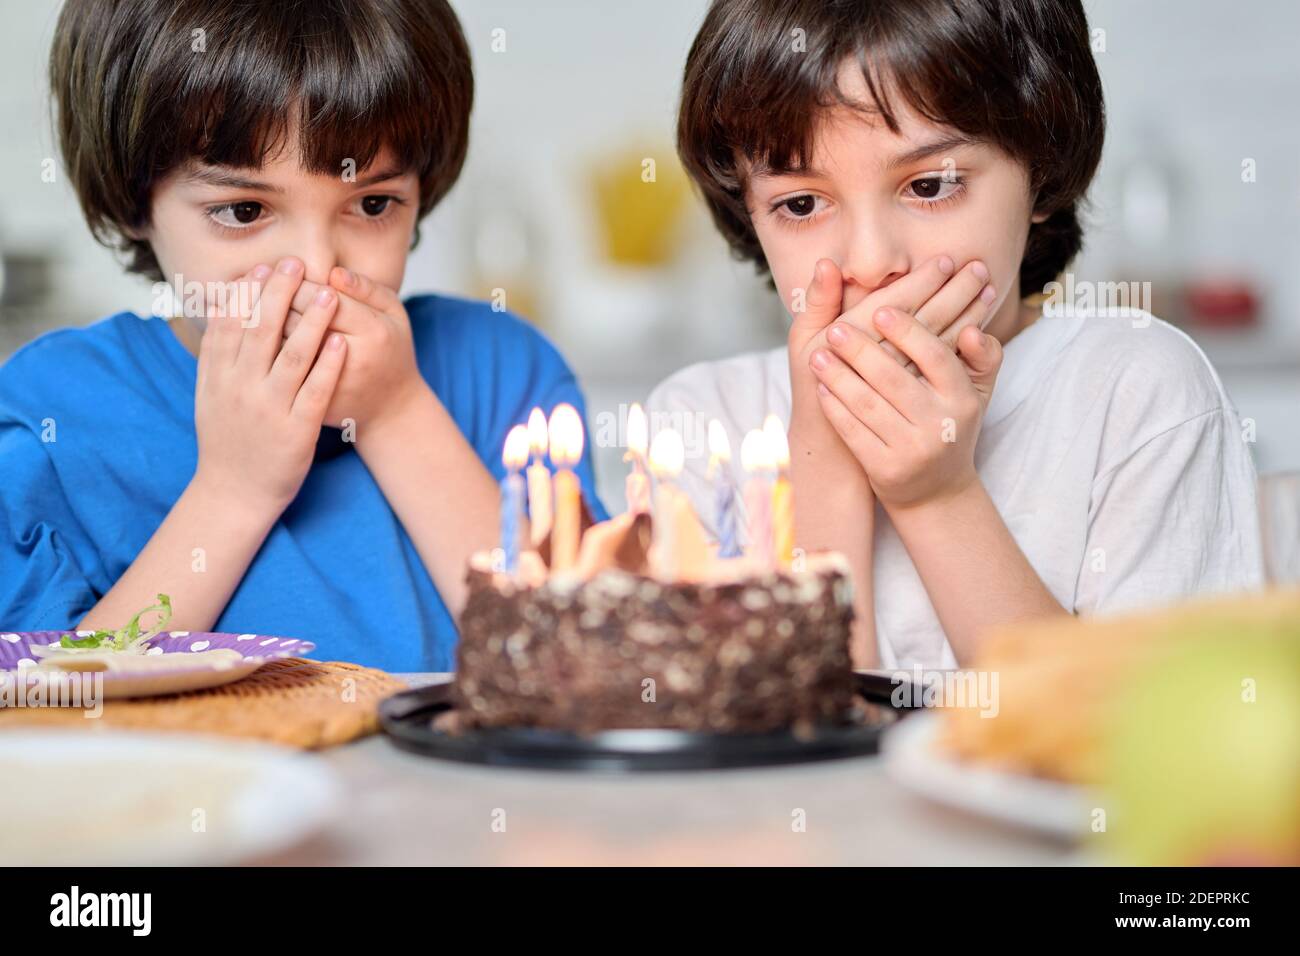 Adorable little hispanic boys looking at birthday cake, making wishes while getting ready for blowing candles, celebrating birthday at home. Selective focus on children Stock Photo